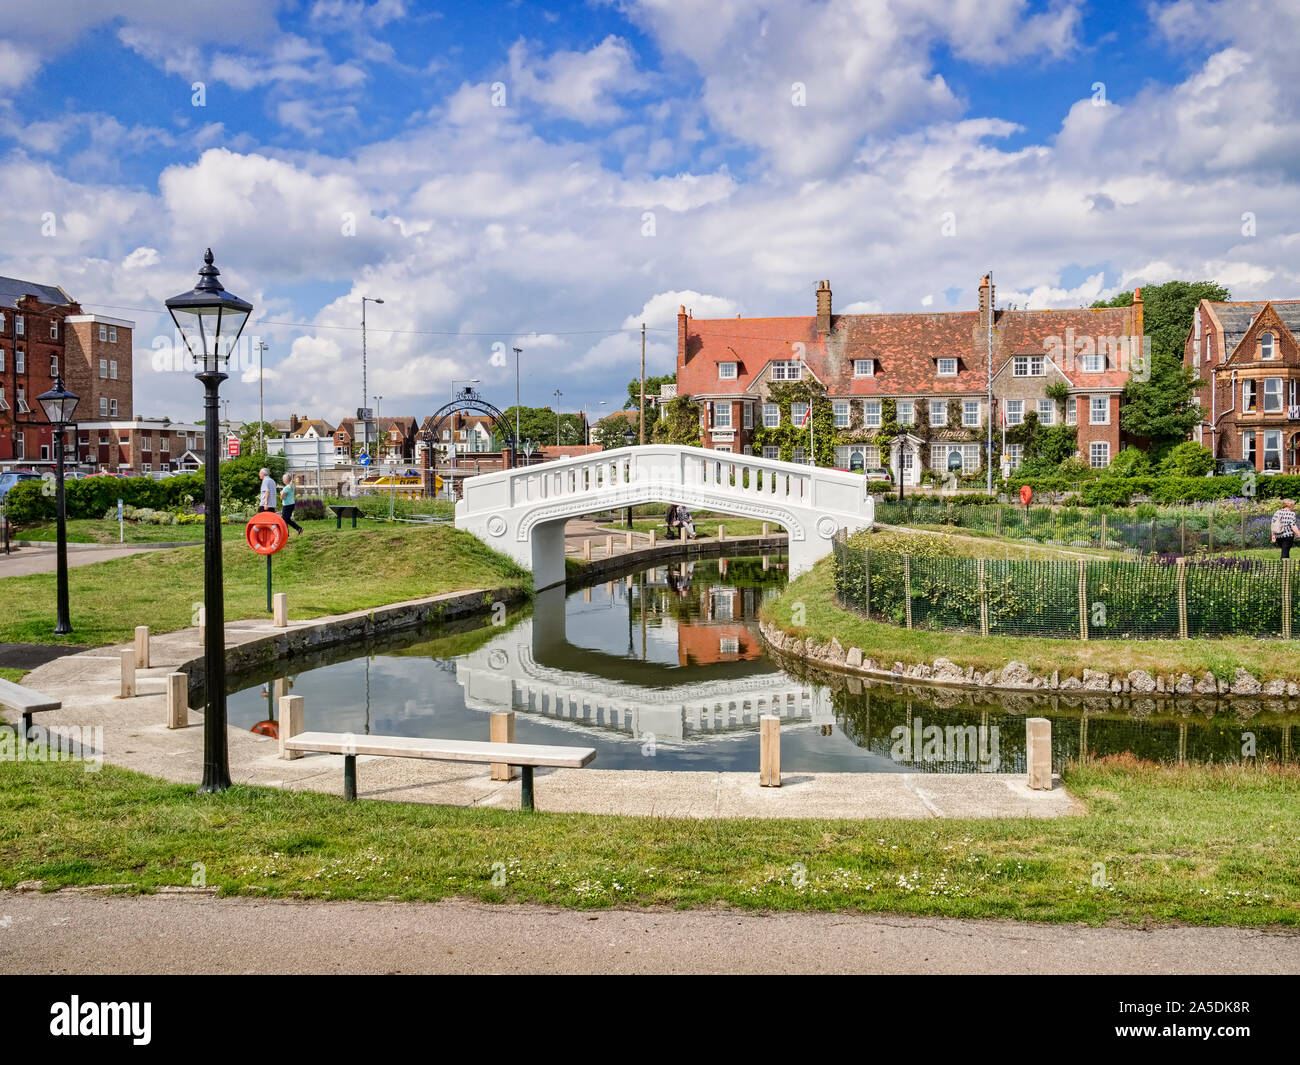 20 June 2019: Great Yarmouth, Norfolk, UK - Part of the Venetian Waterways and Boating Lake, Great Yarmouth. Dating from 1928, the park has been resto Stock Photo